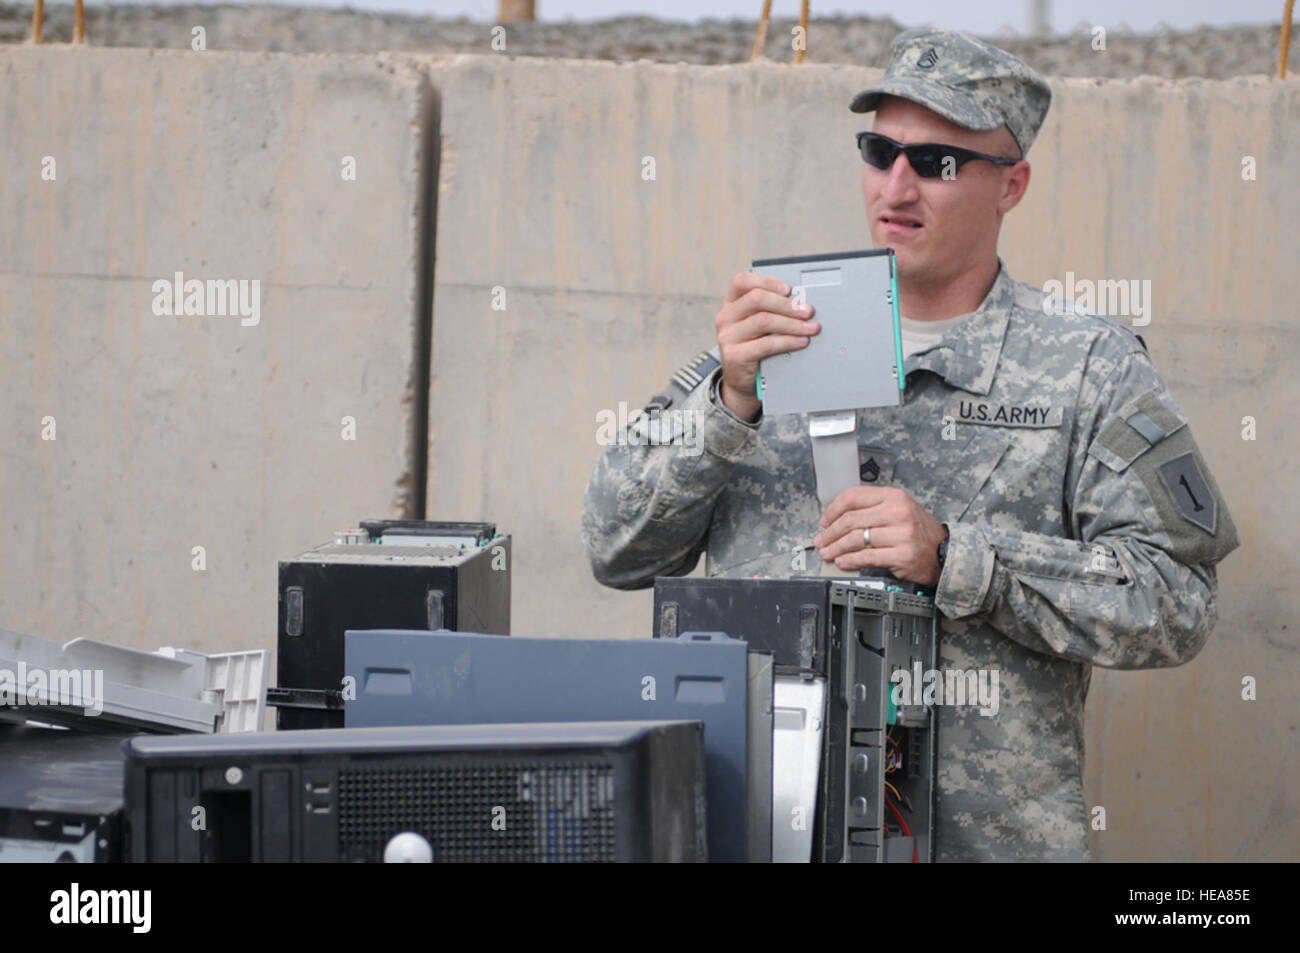 U.S. Army Staff Sgt. Joshua Weinland from the 1st Infantry Division, 5-2 Federal Police Training Team, removes a disk drive from a computer at the Defense Reutilization and Marketing Service area, at Camp Victory, near Baghdad, Iraq, Oct. 30. Stock Photo